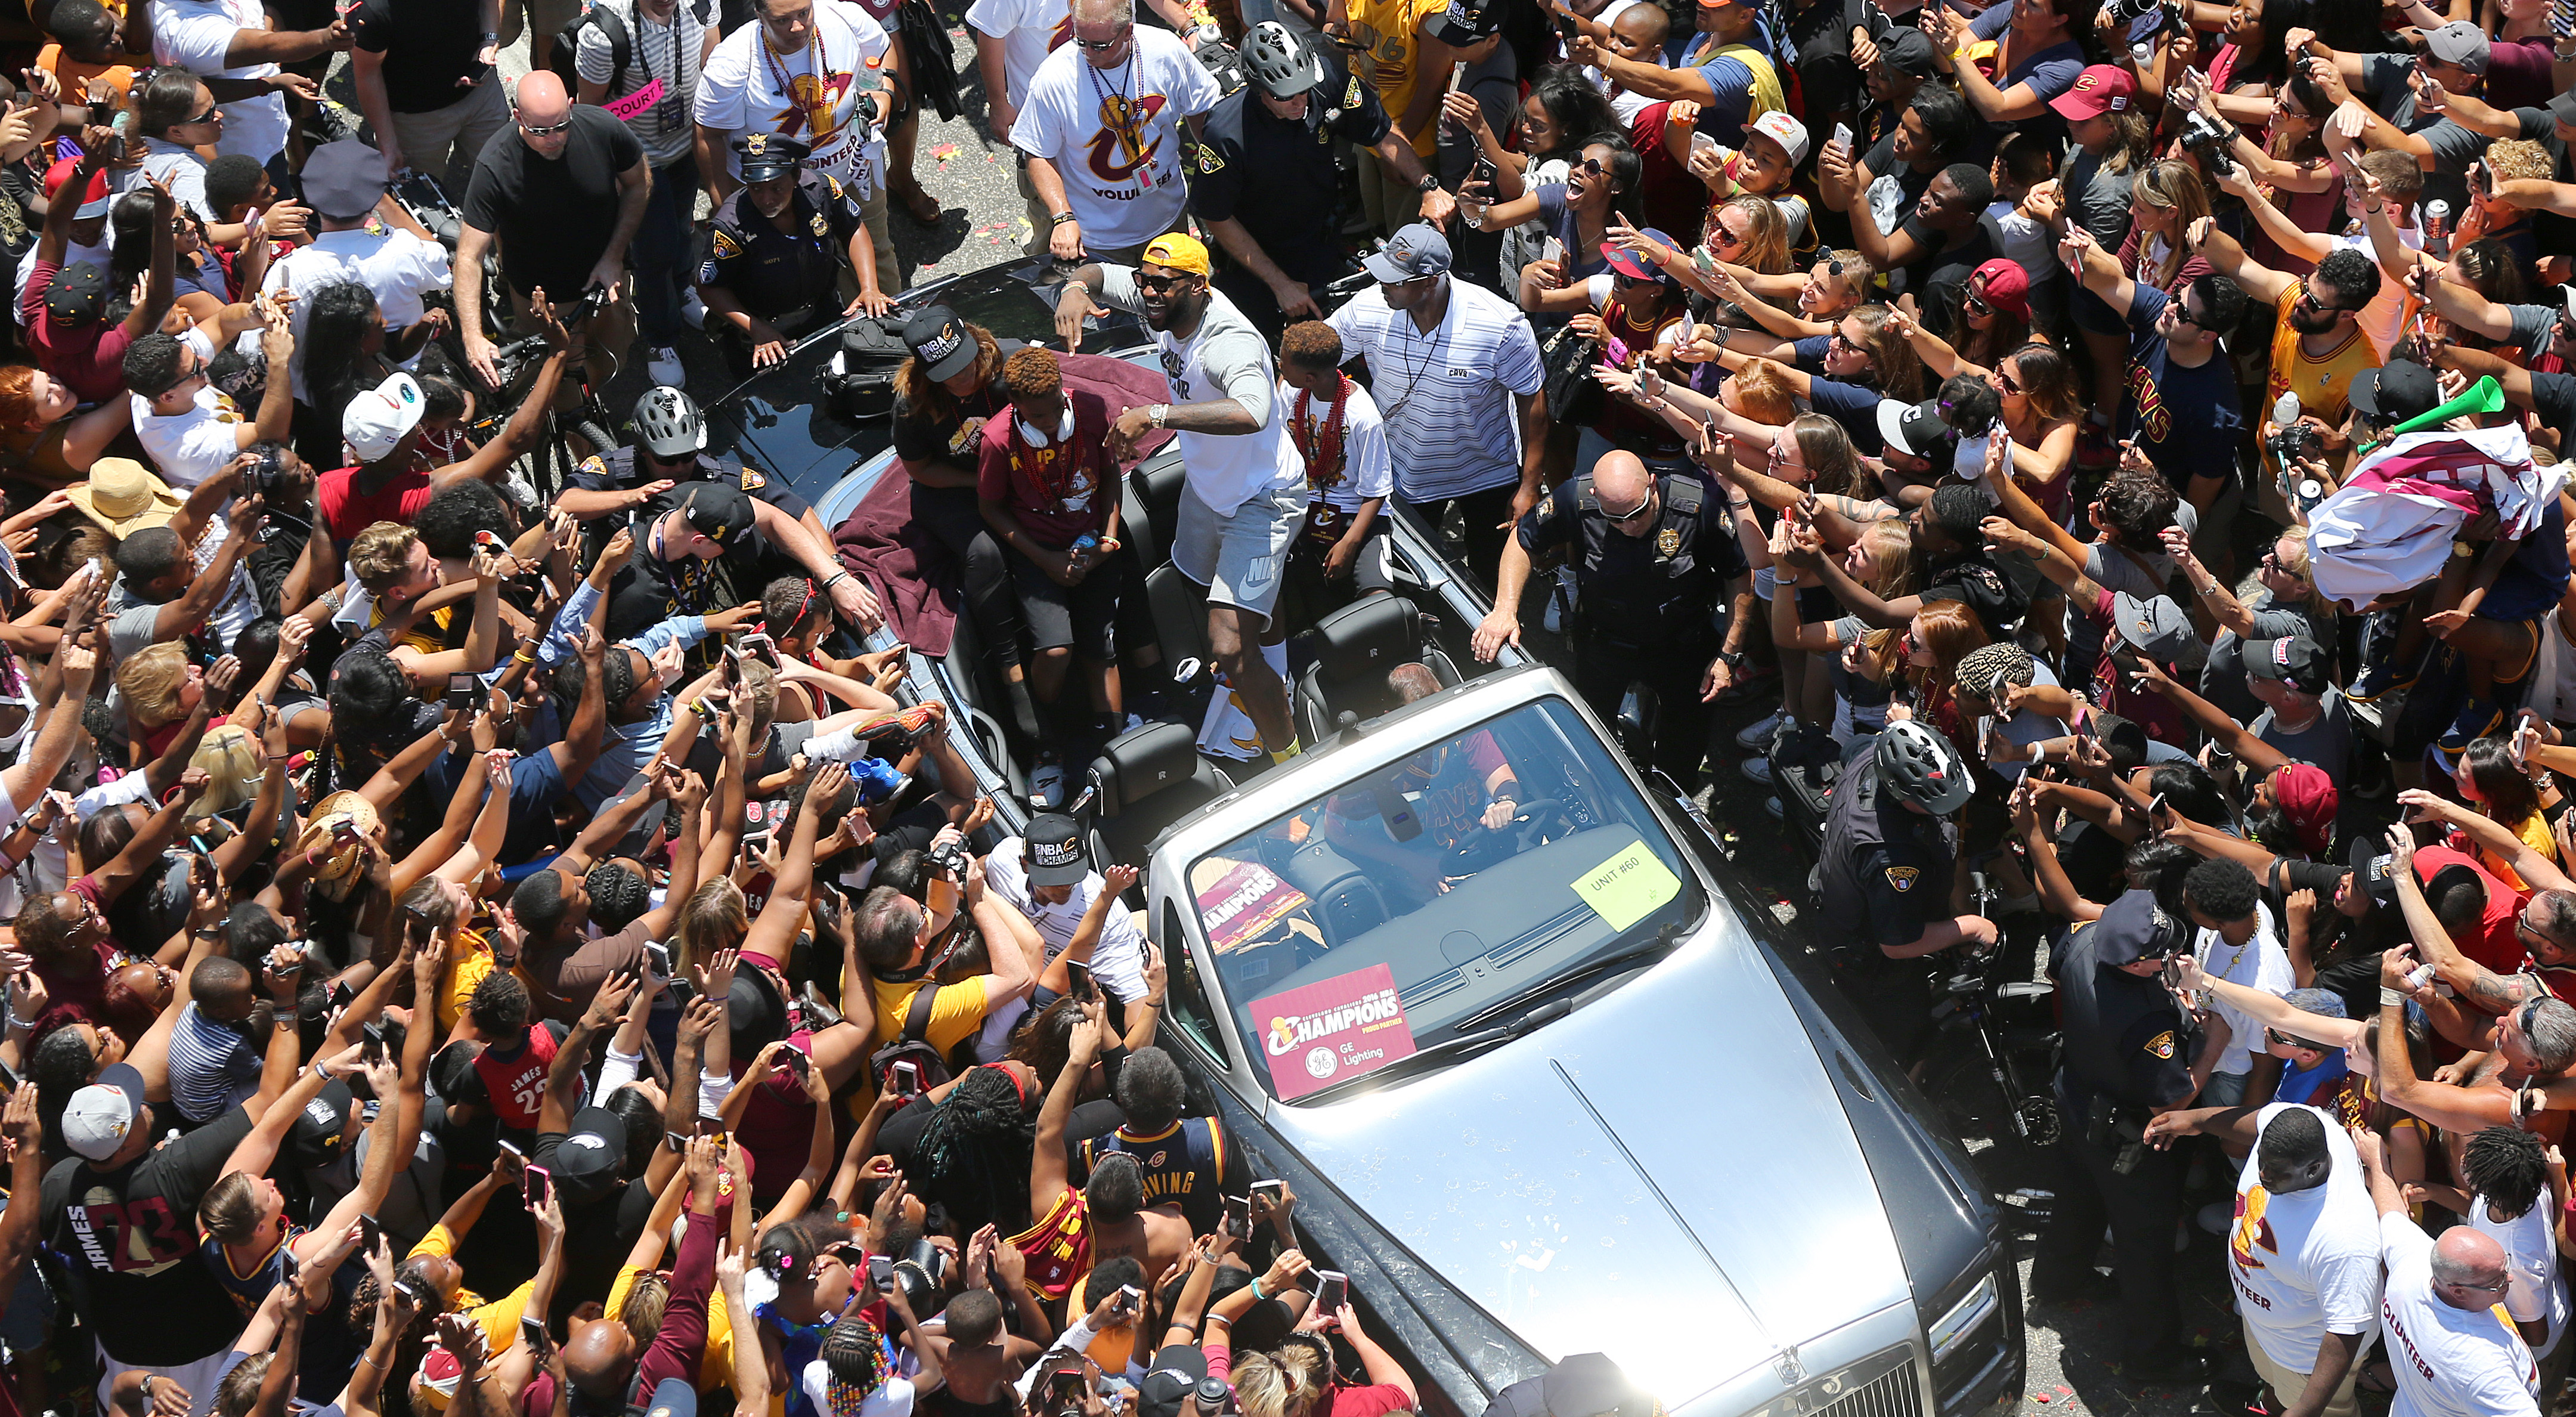 Cleveland Cavaliers forward LeBron James dances along with fans during a parade in downtown Cleveland to celebrate and honor the 2016 NBA Champion Cleveland Cavaliers.    Joshua Gunter, cleveland.com June 22, 2016. Cleveland. 